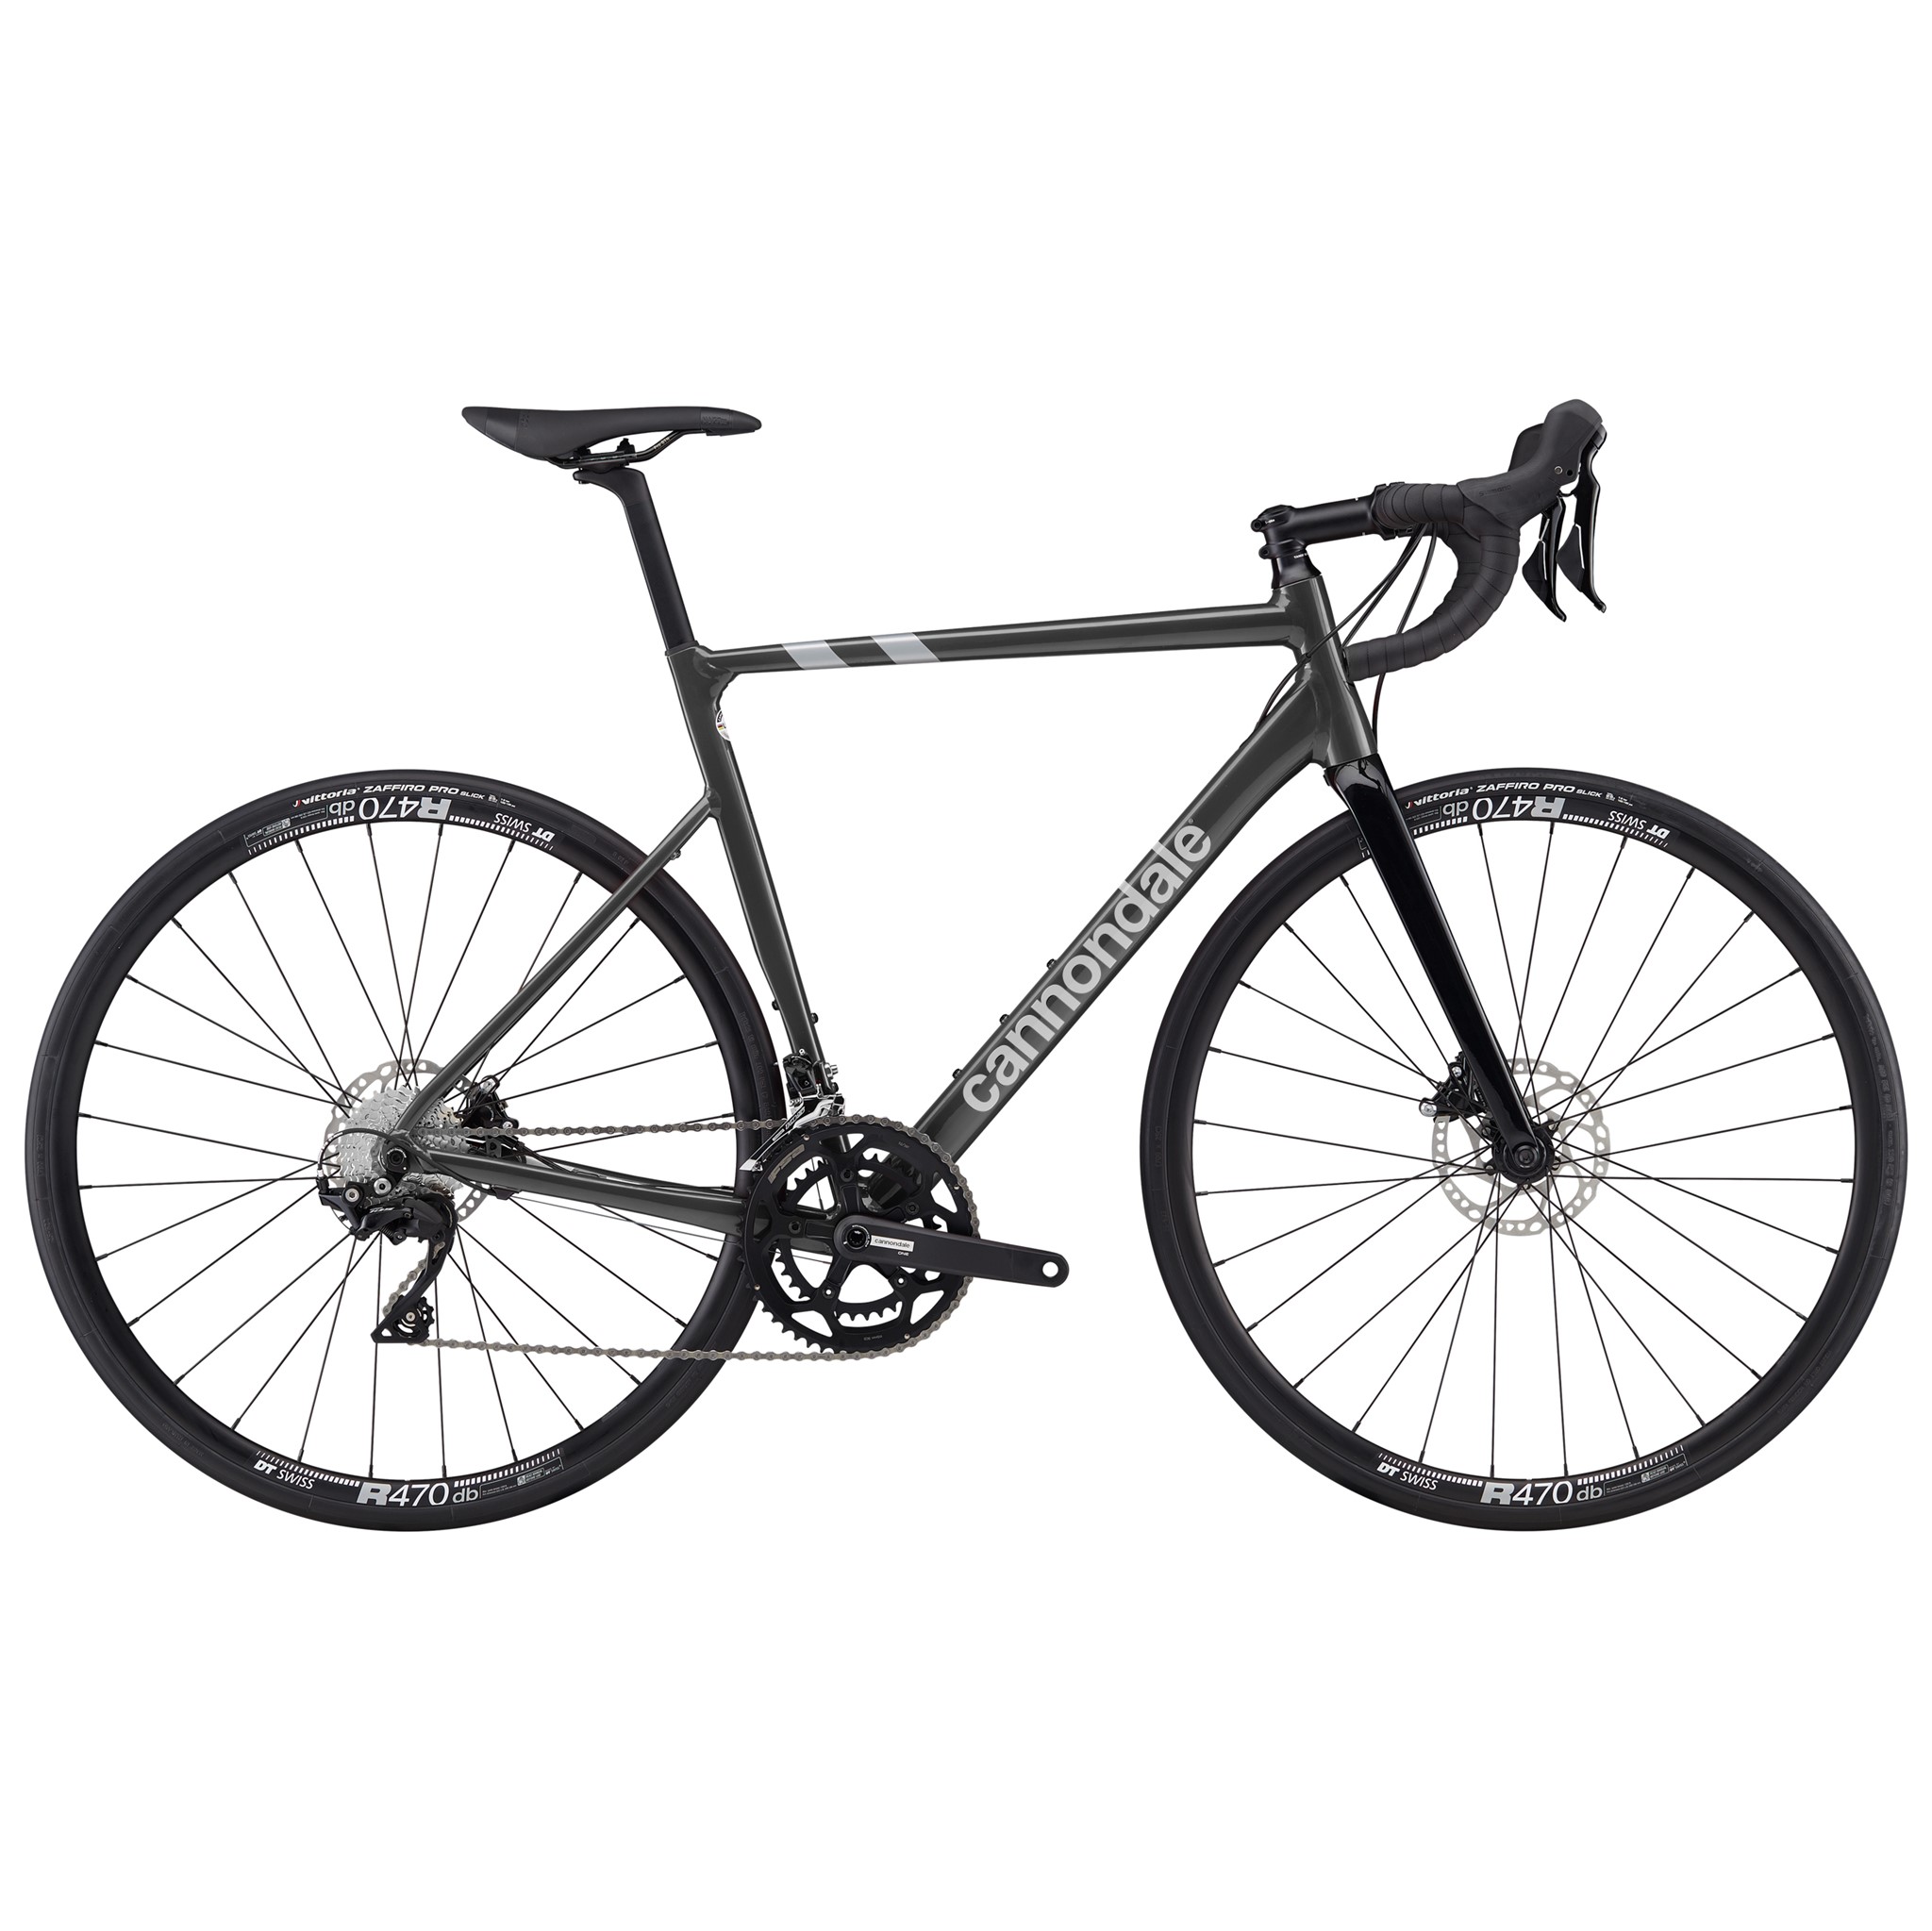 Picture of Cannondale CAAD13 Disc 105 road bike 2022 - Matte Black